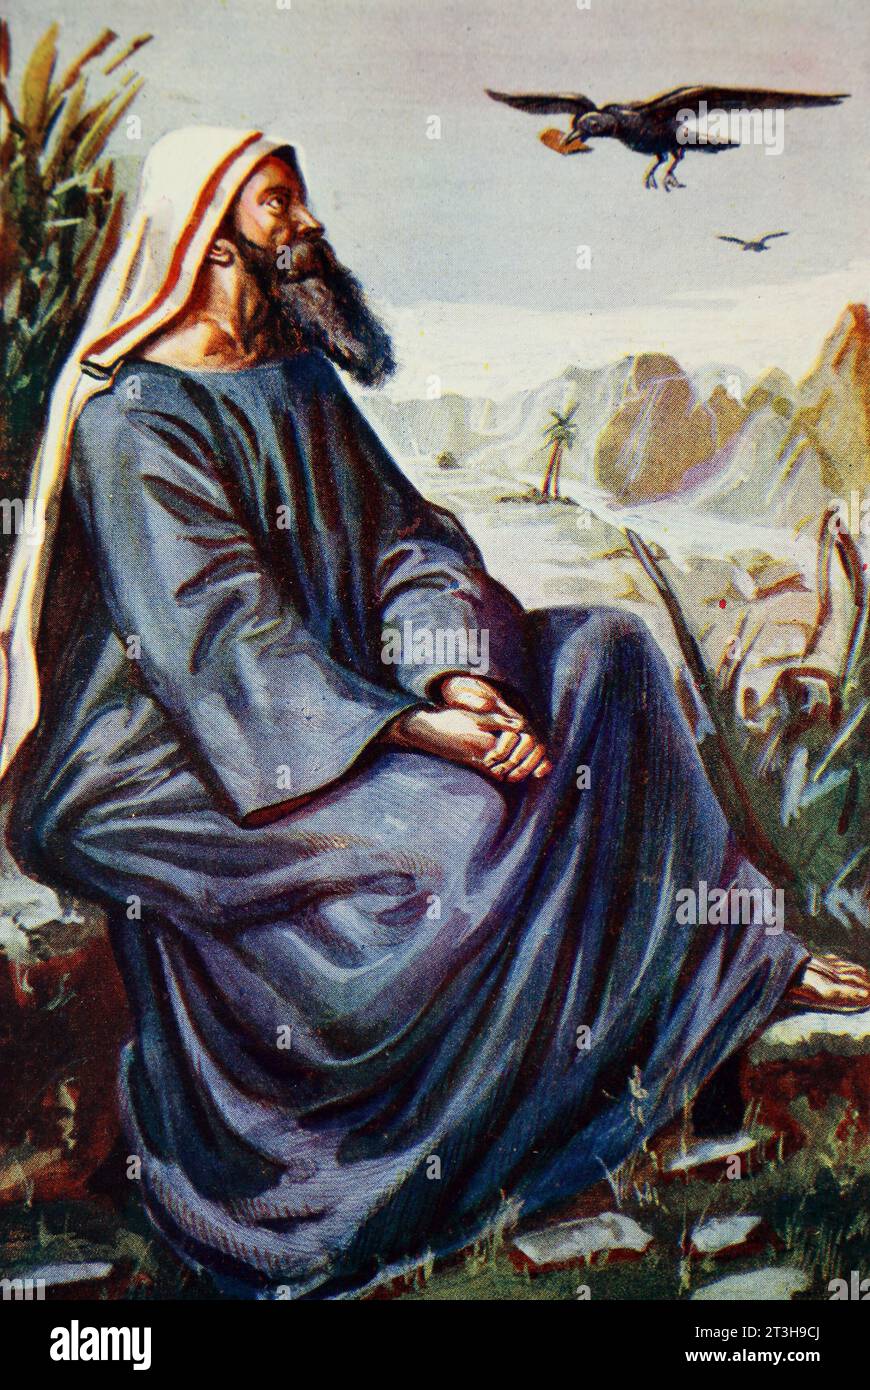 Illustration of Elijah by the brook being Fed by the Ravens from the Book of Kings Old Testament and Nevi'im from 19th century Bible Stock Photo